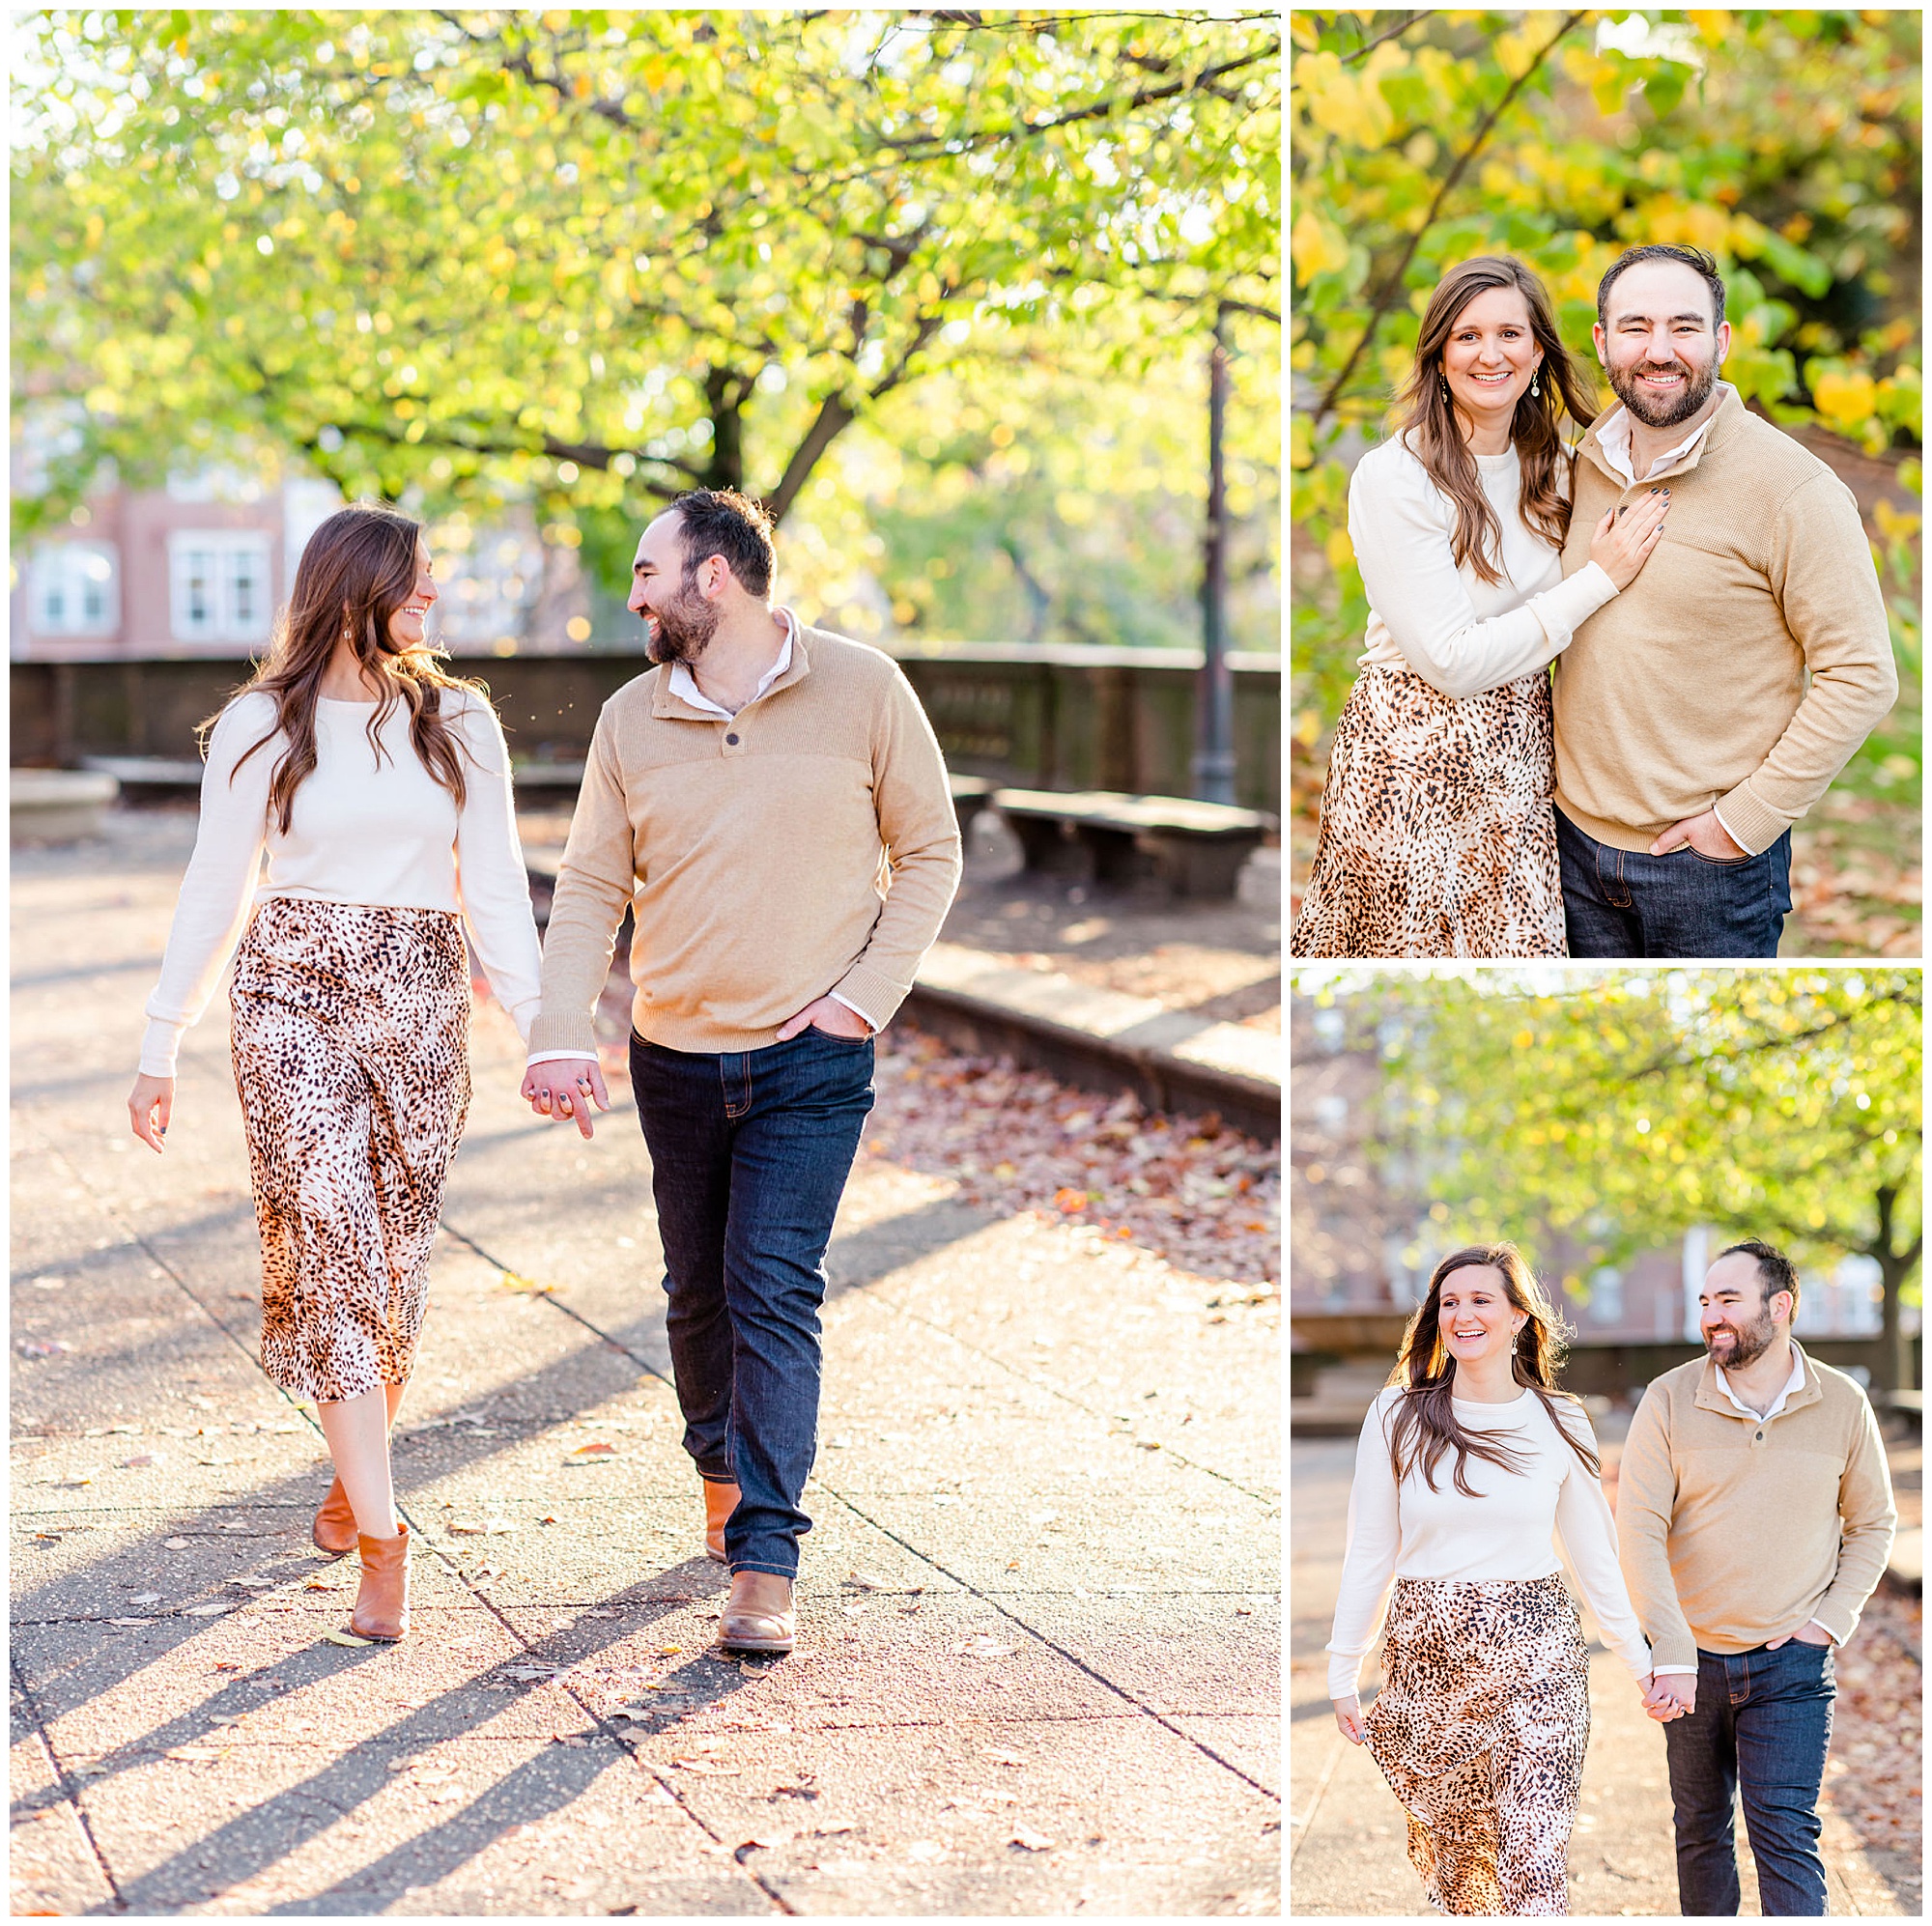 Meridian Hill Park engagement session, Meridian Hill Park DC, DC engagement photography, DC engagement photos, DC engagement session, DC engagement photographer, DC proposal photographer, DC wedding photographer, autumn engagement photos, Rachel E.H. Photography, couple holding hands and walking, man looking at woman